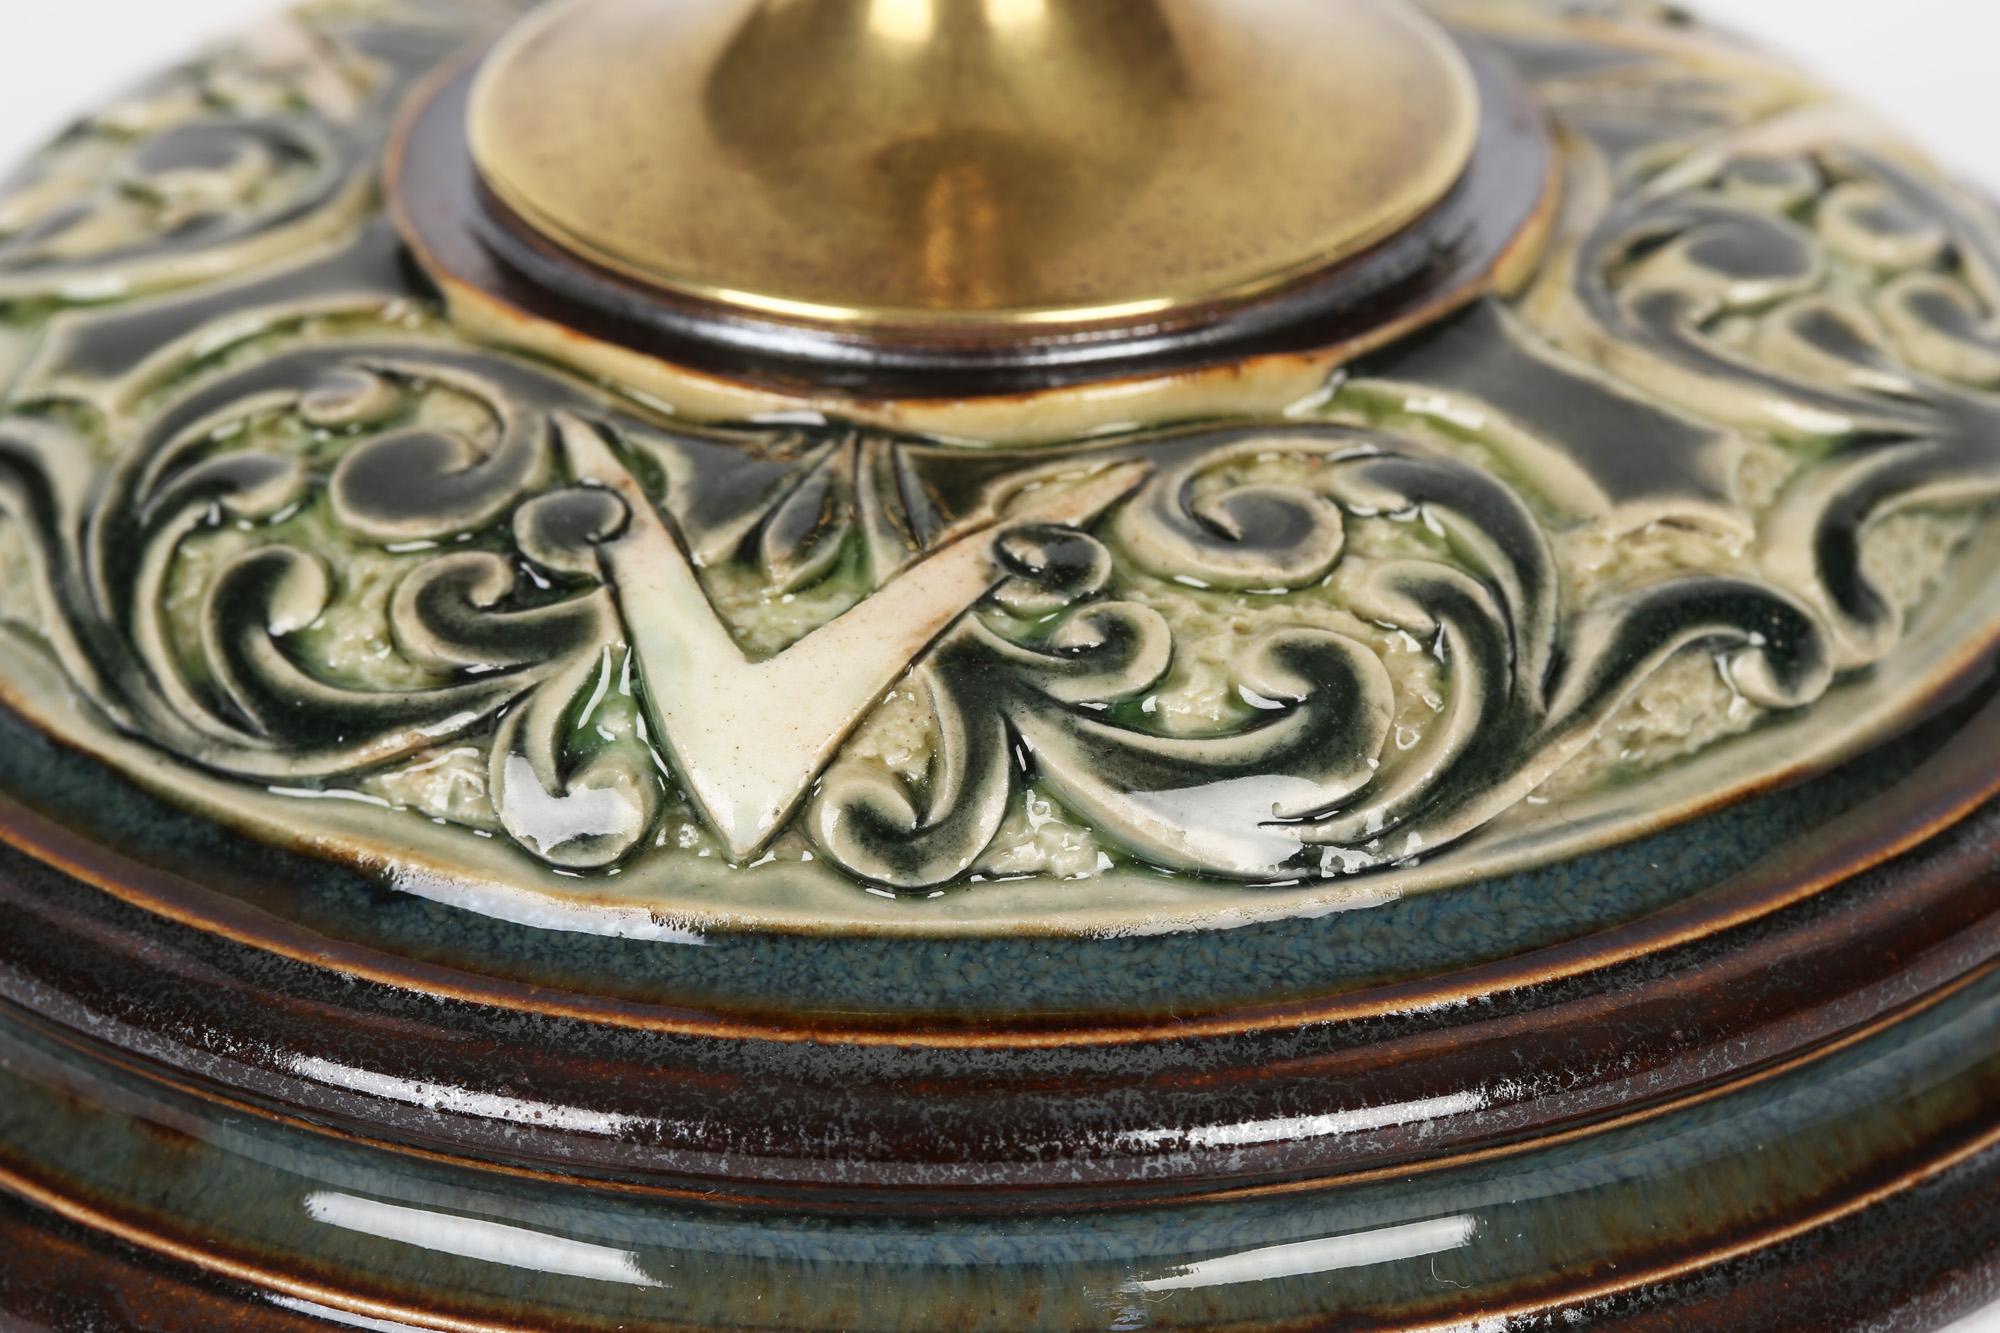 An unusual Doulton Lambeth saucer shape stylized leaf design candlestick with brass fittings by Frank Butler and dating from around 1890. The candle stick stands mounted on a wide rounded stoneware base with a shaped rim and moulded with V shaped